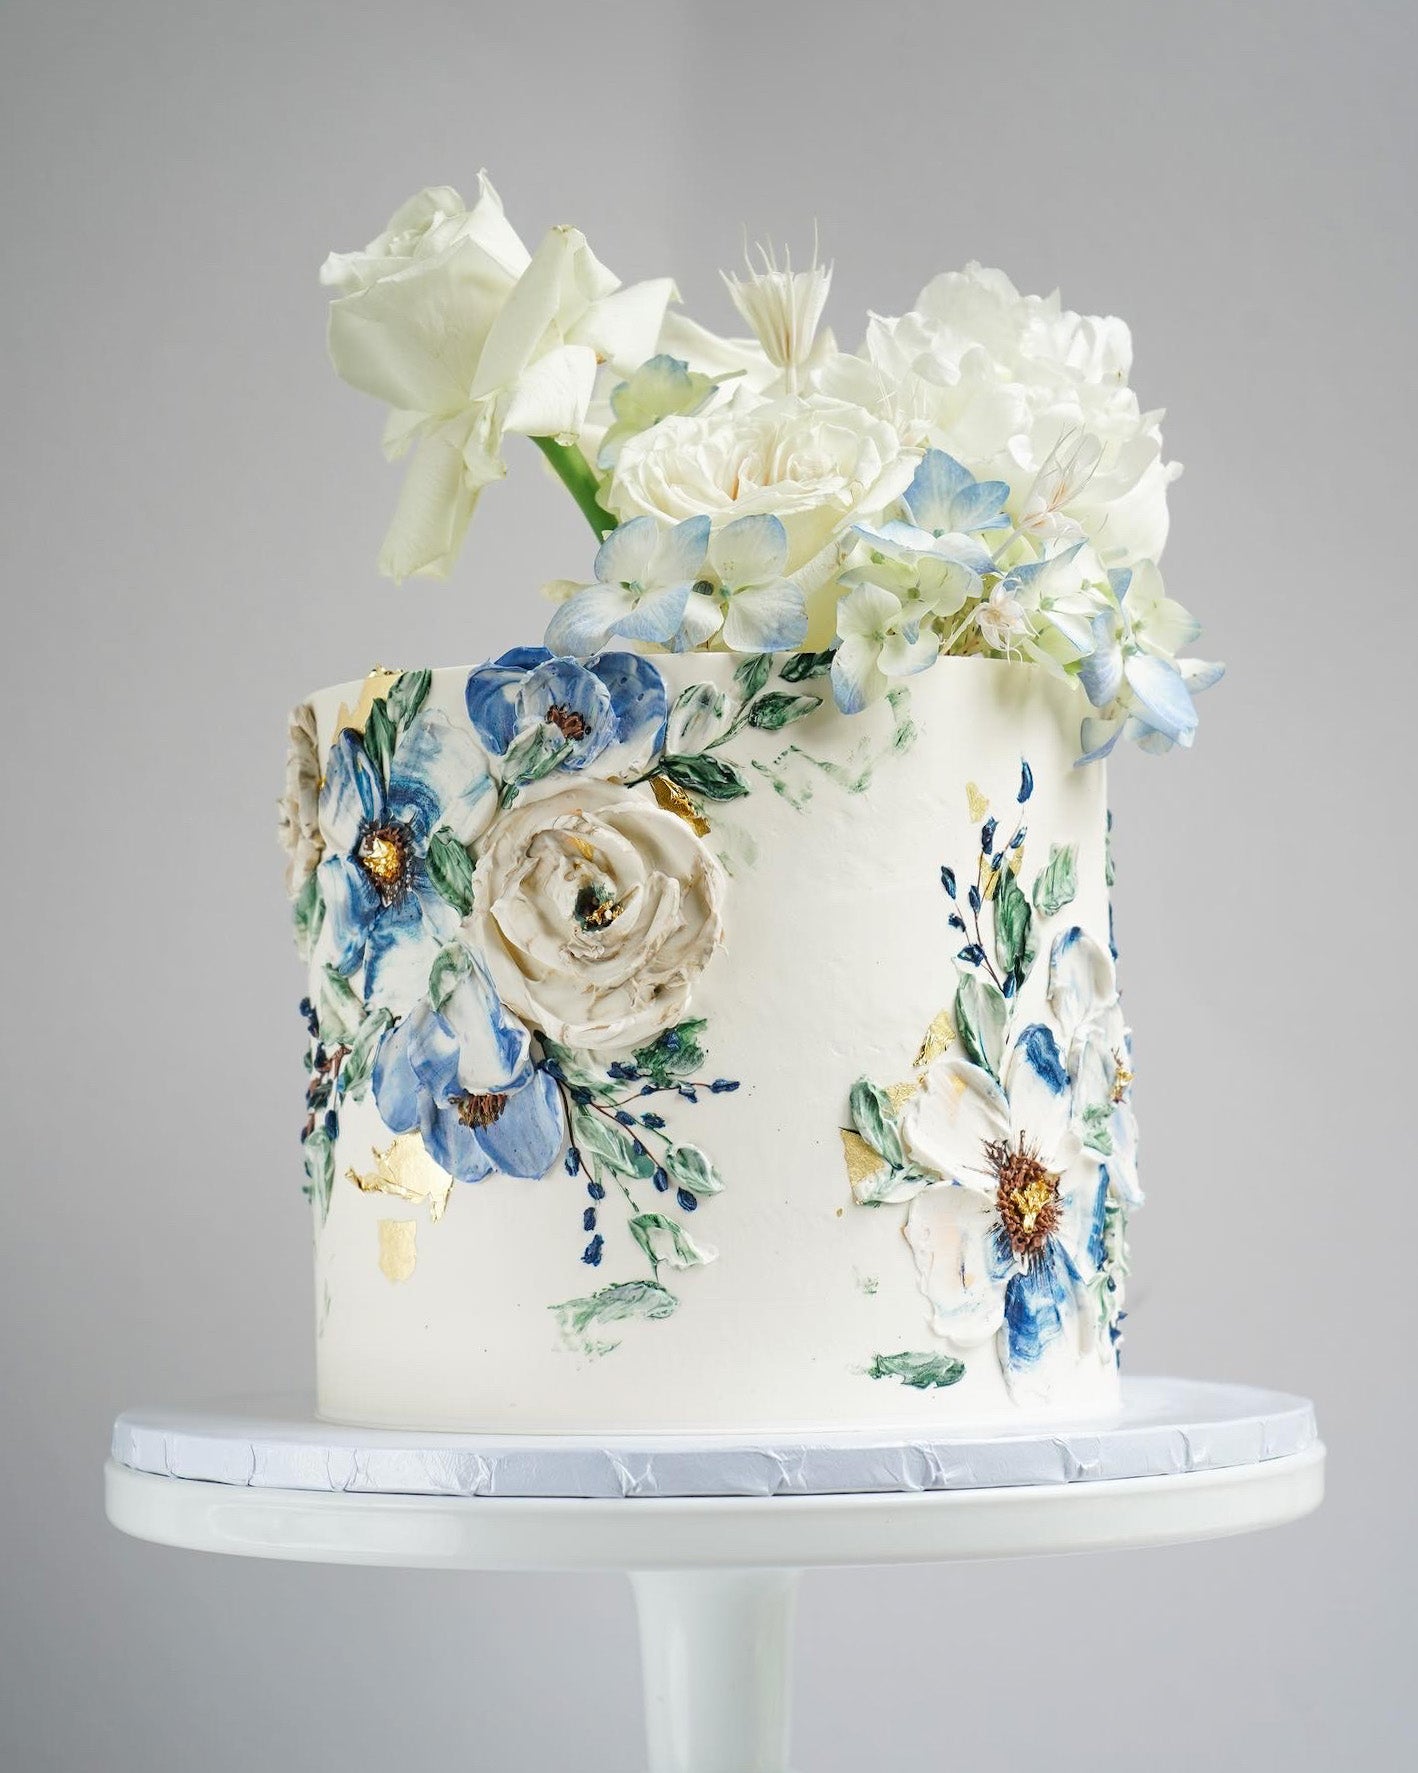 Buttercream Camellias and Elegant Piping- A Free Cake Video - My Cake School